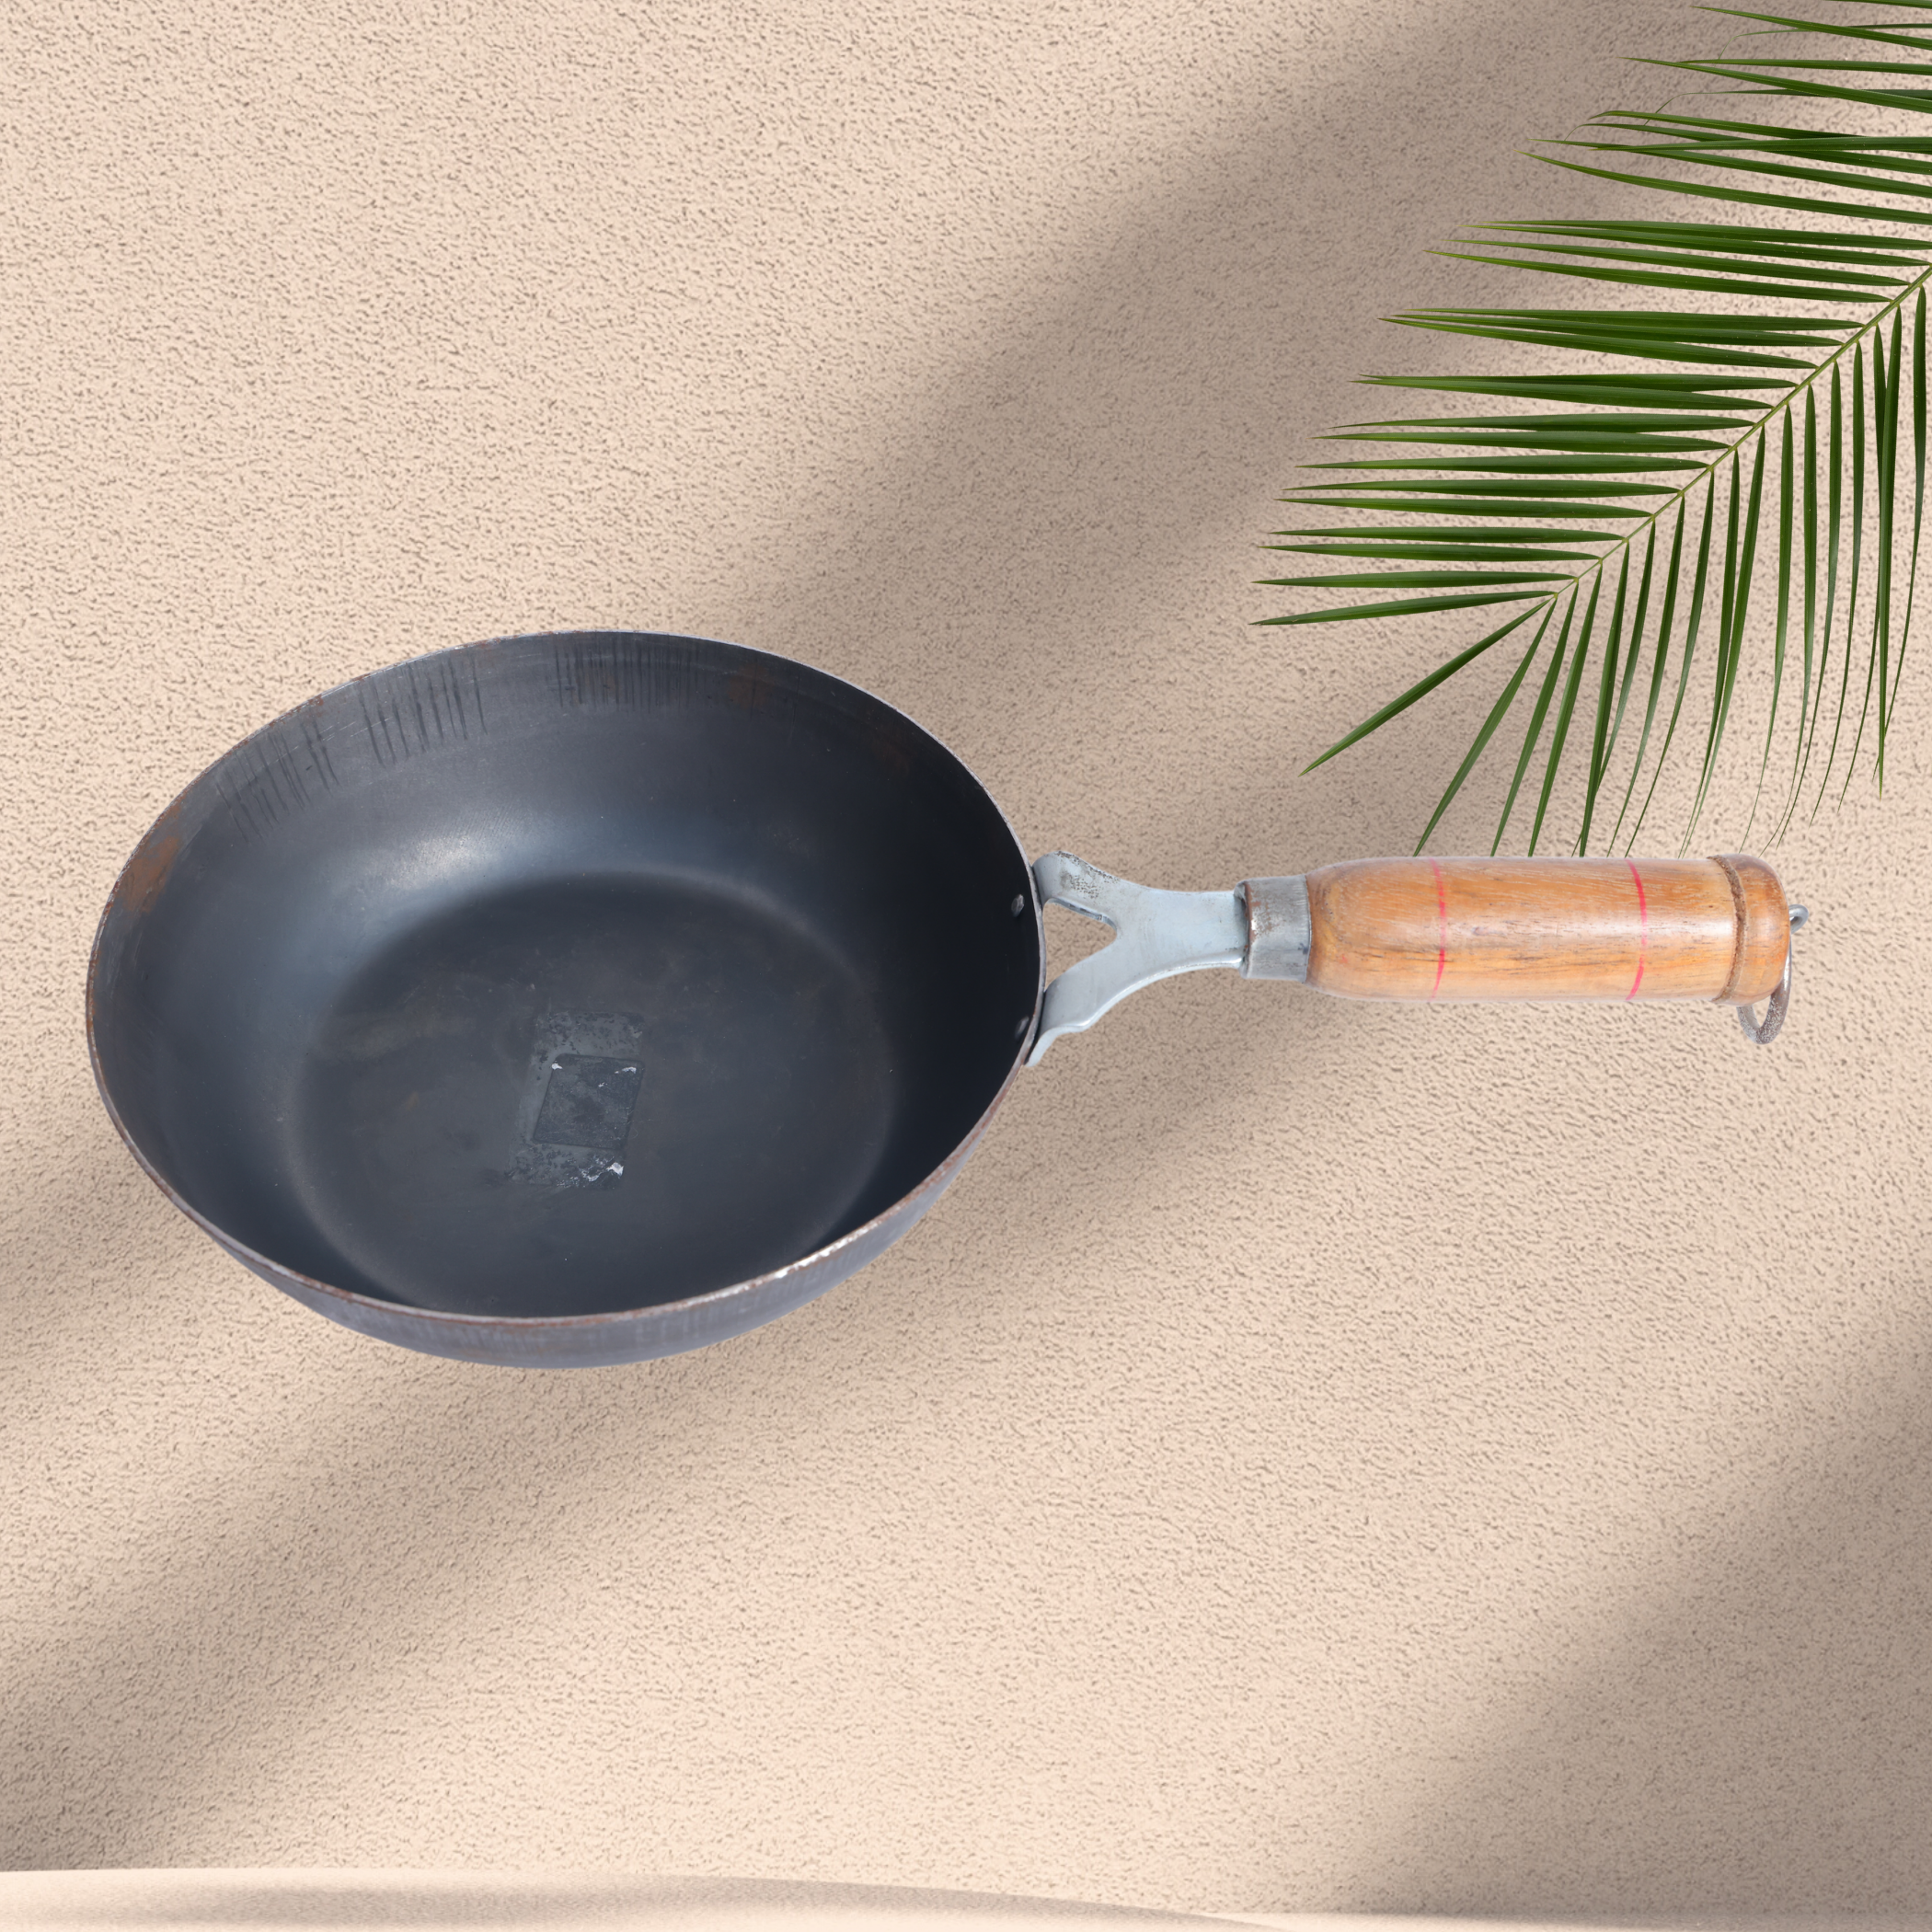 CAST IRON 7 Inch Frying Pan with Wooden Handle